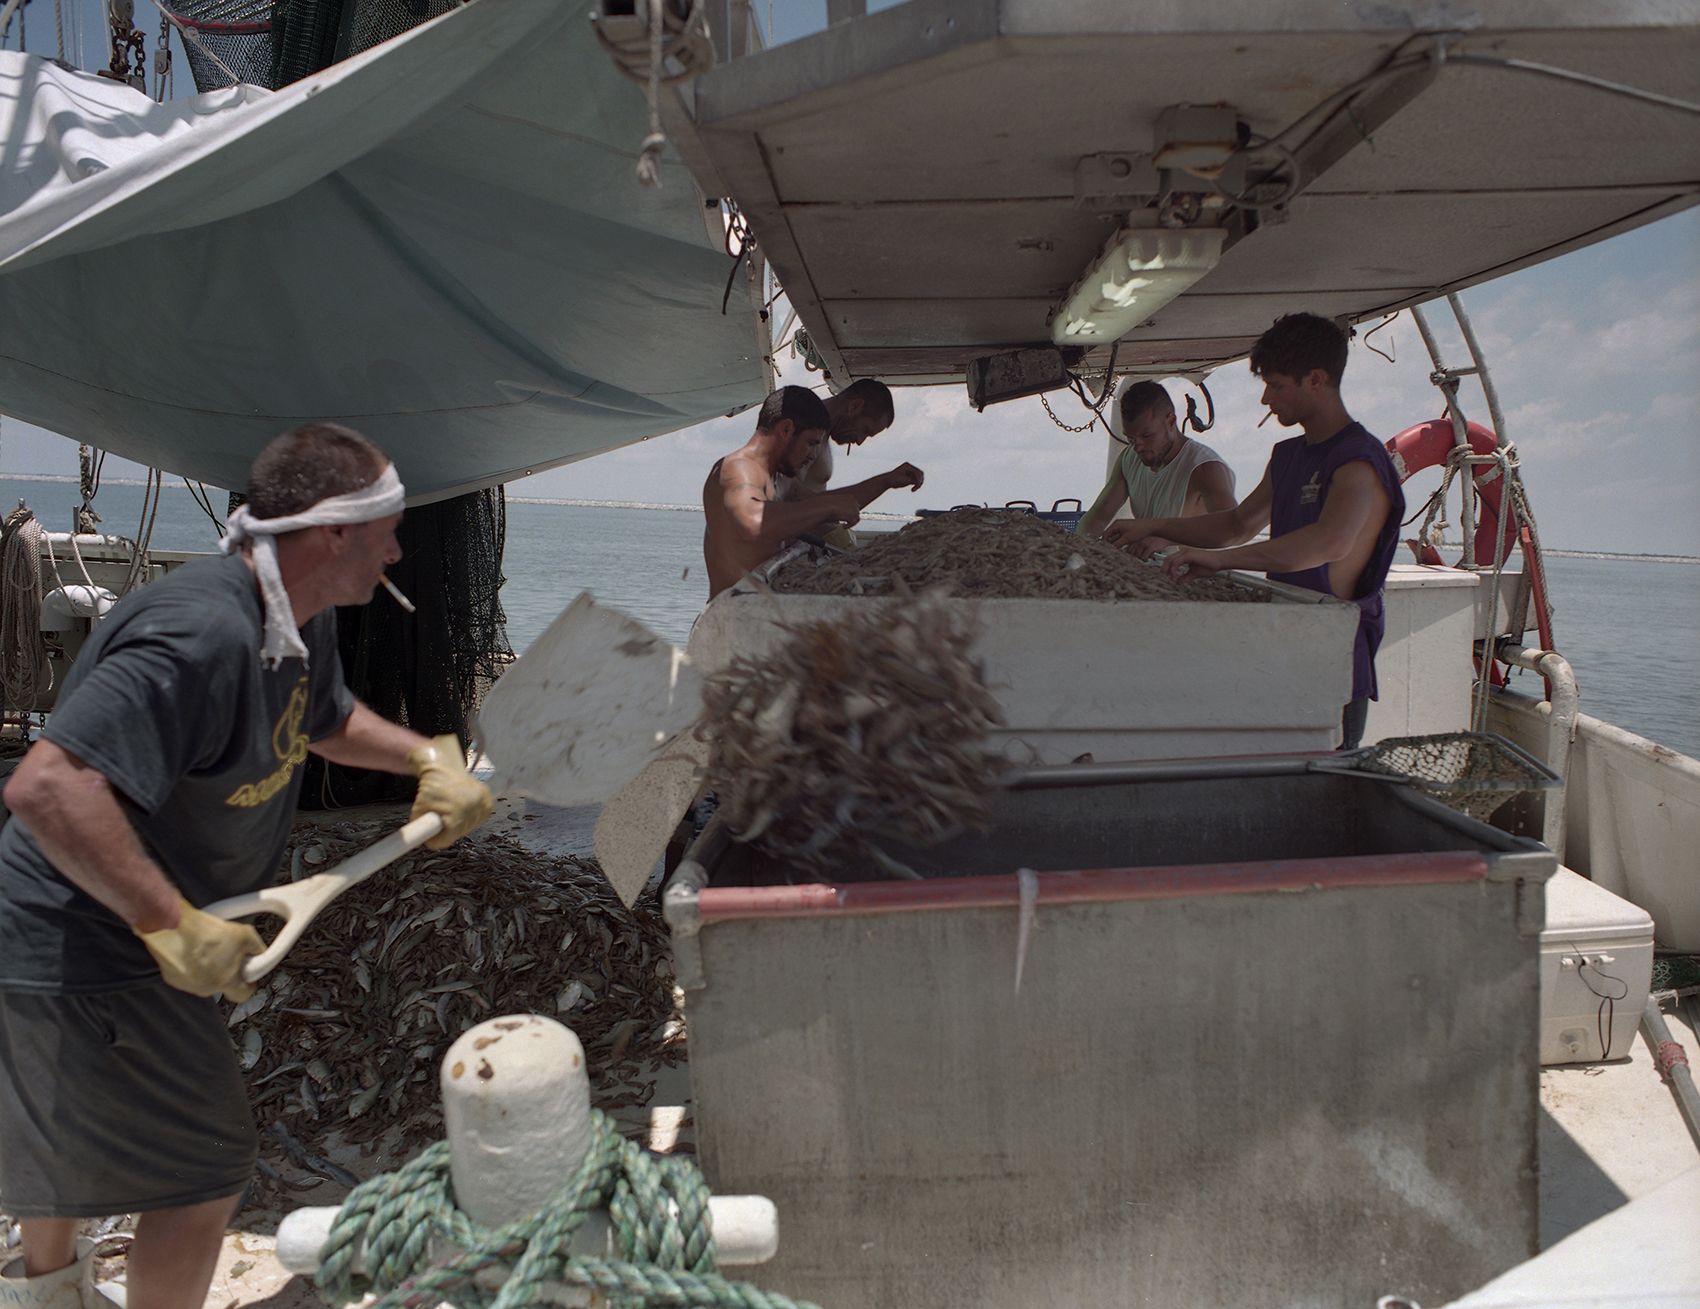 Dean Blanchard’s workers shovel shrimp off the fiberglass deck and into holding tanks. Image by Spike Johnson. United States, 2019.